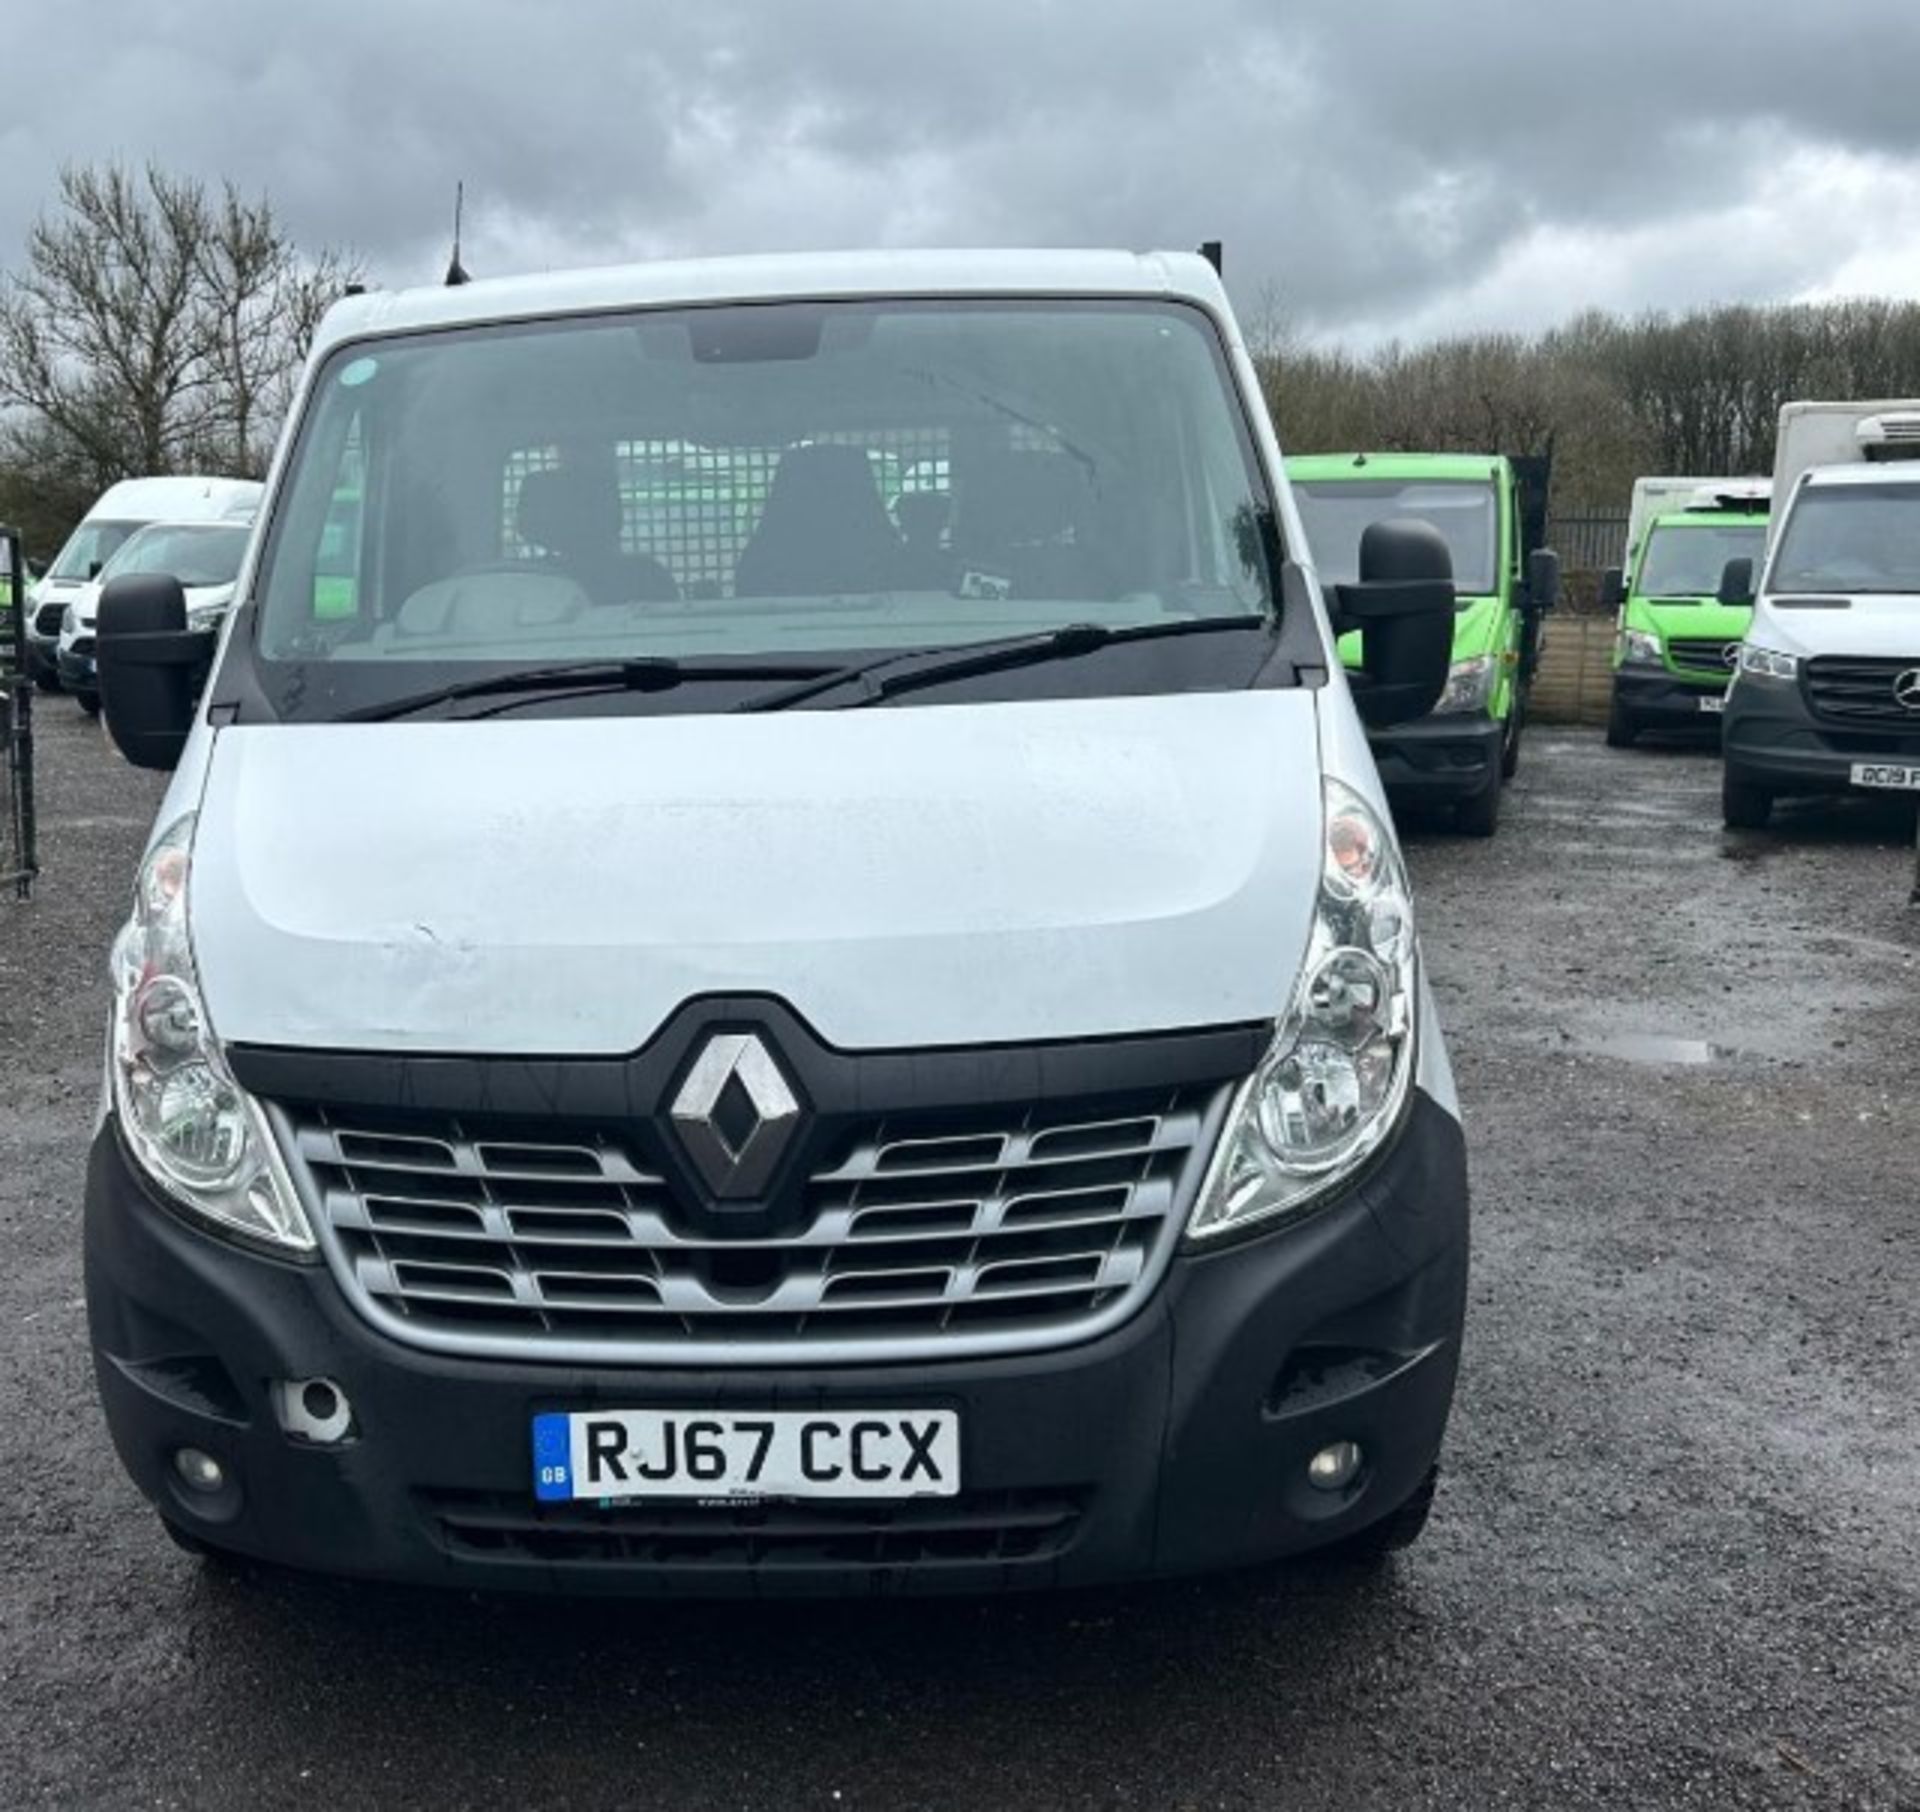 >>>SPECIAL CLEARANCE<<< 2018 RENAULT MASTER ML35 BUSINESS DCI 125 L2H1 MWB - Image 3 of 13